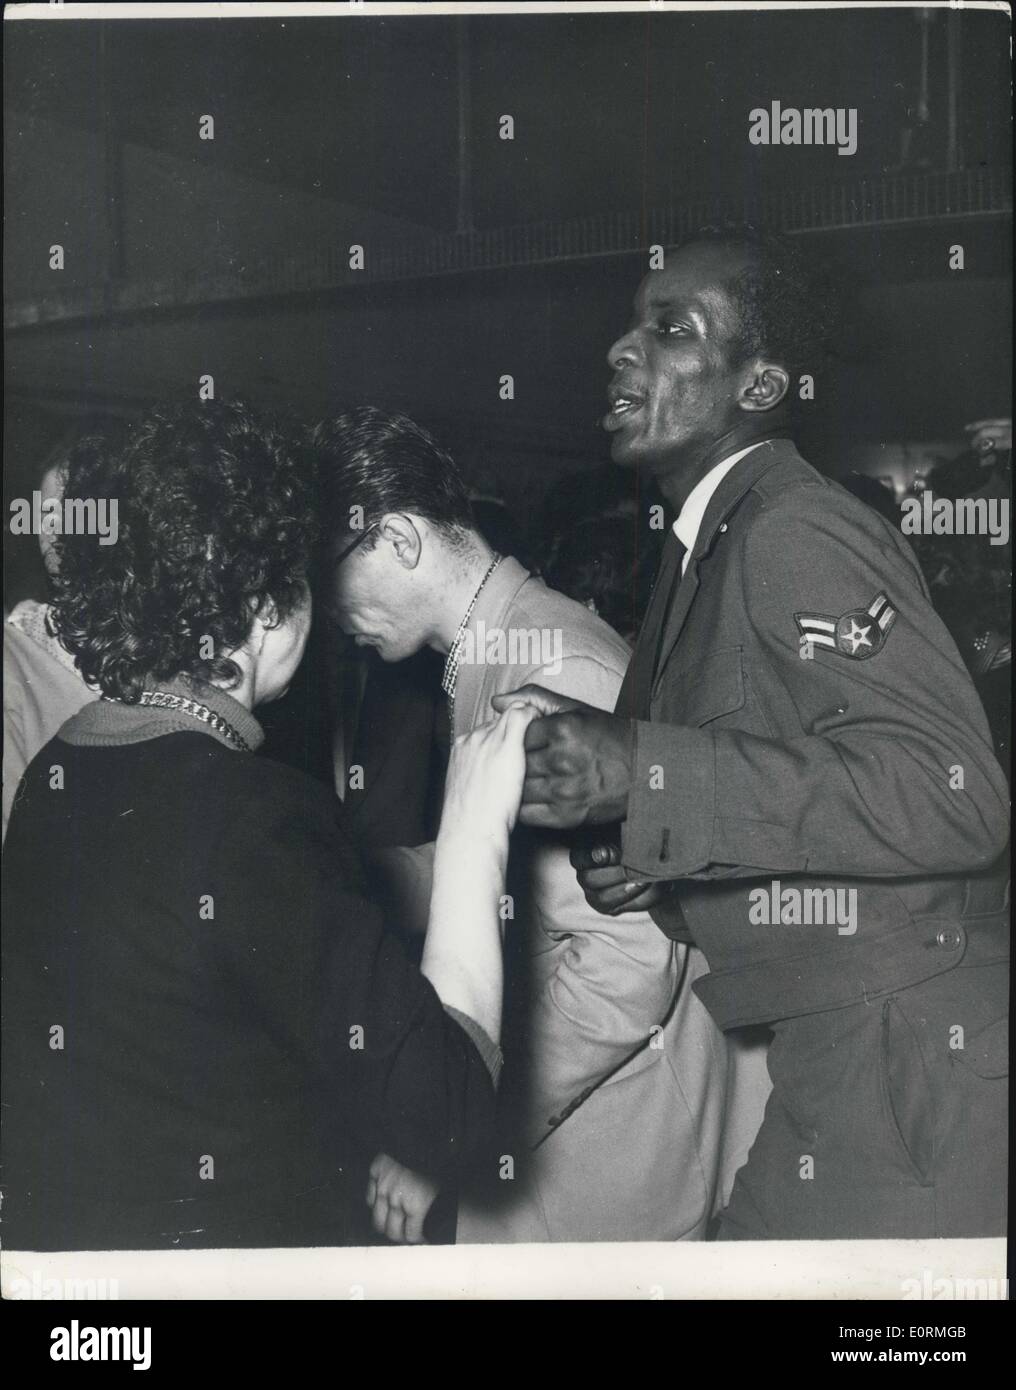 Jan 1, 1960 - The Corporal Old Weekend Pass: He came to the all-night Americana Club alone. So did she. Now they're together, dancing Wildly on the floor to the rhythms of the Roy quartet. Stock Photo